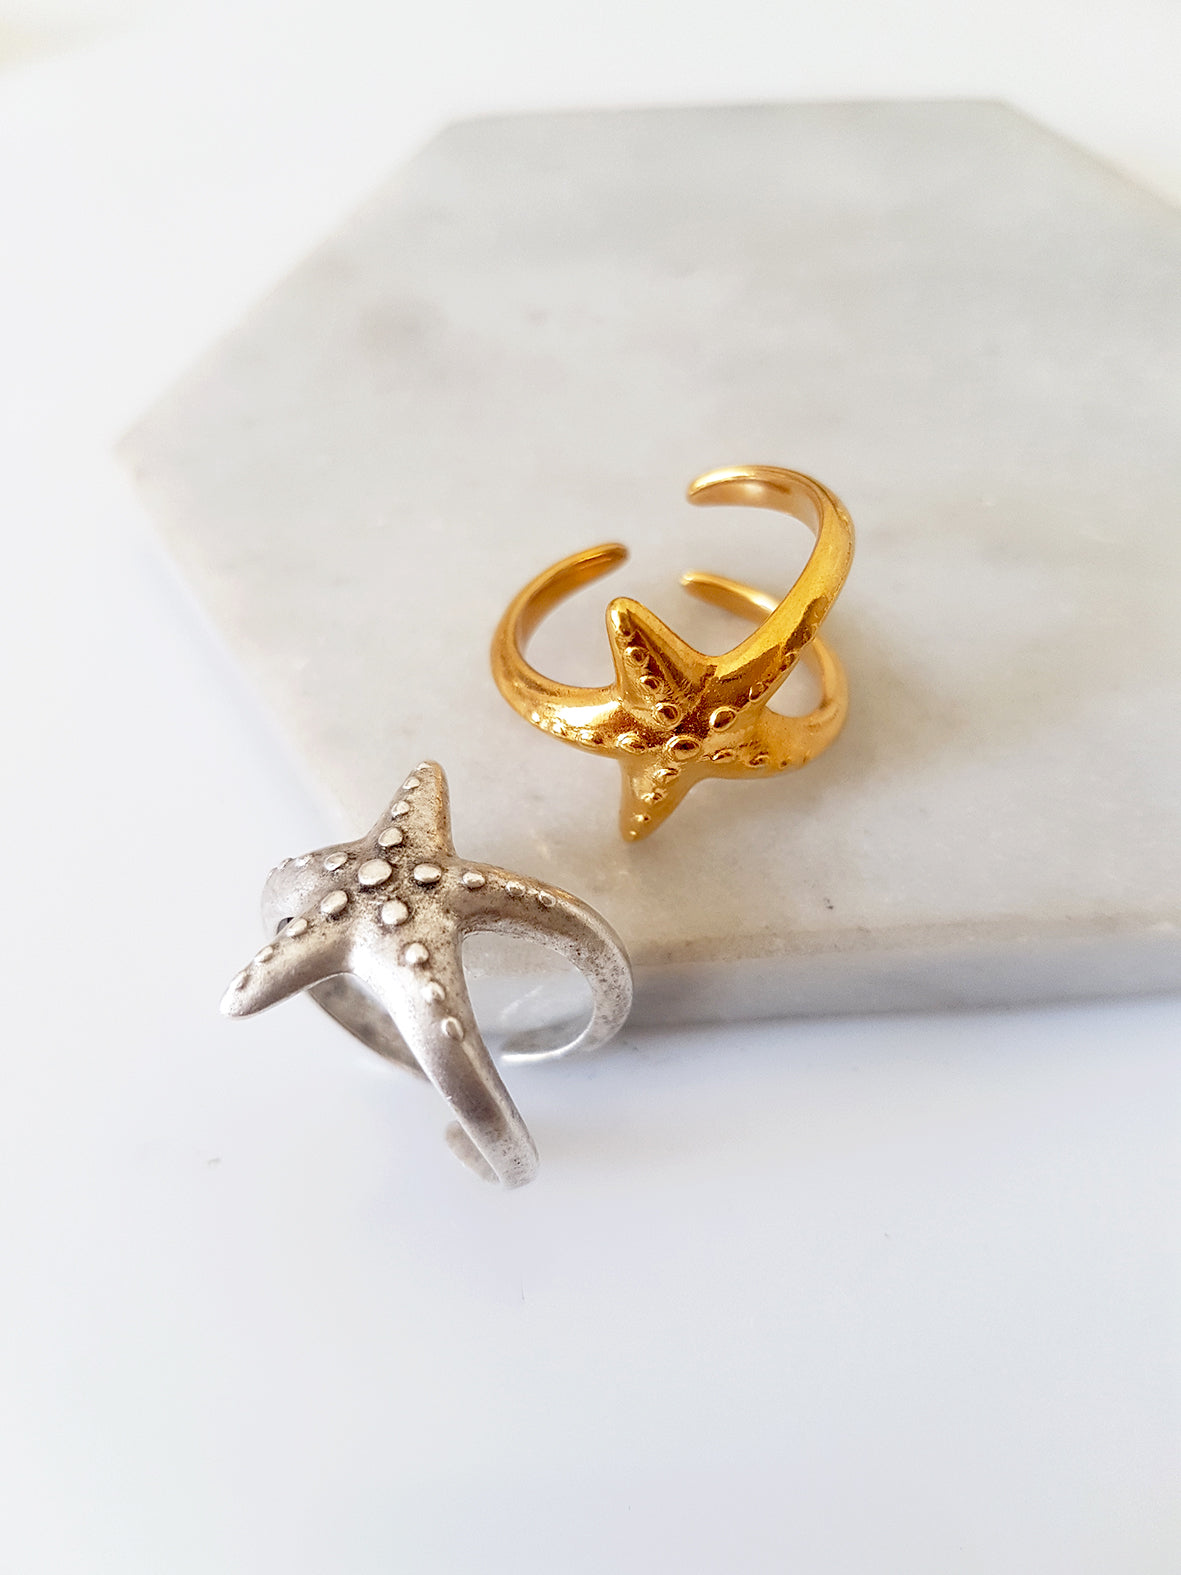 Starfish ring in a package of 4 pieces